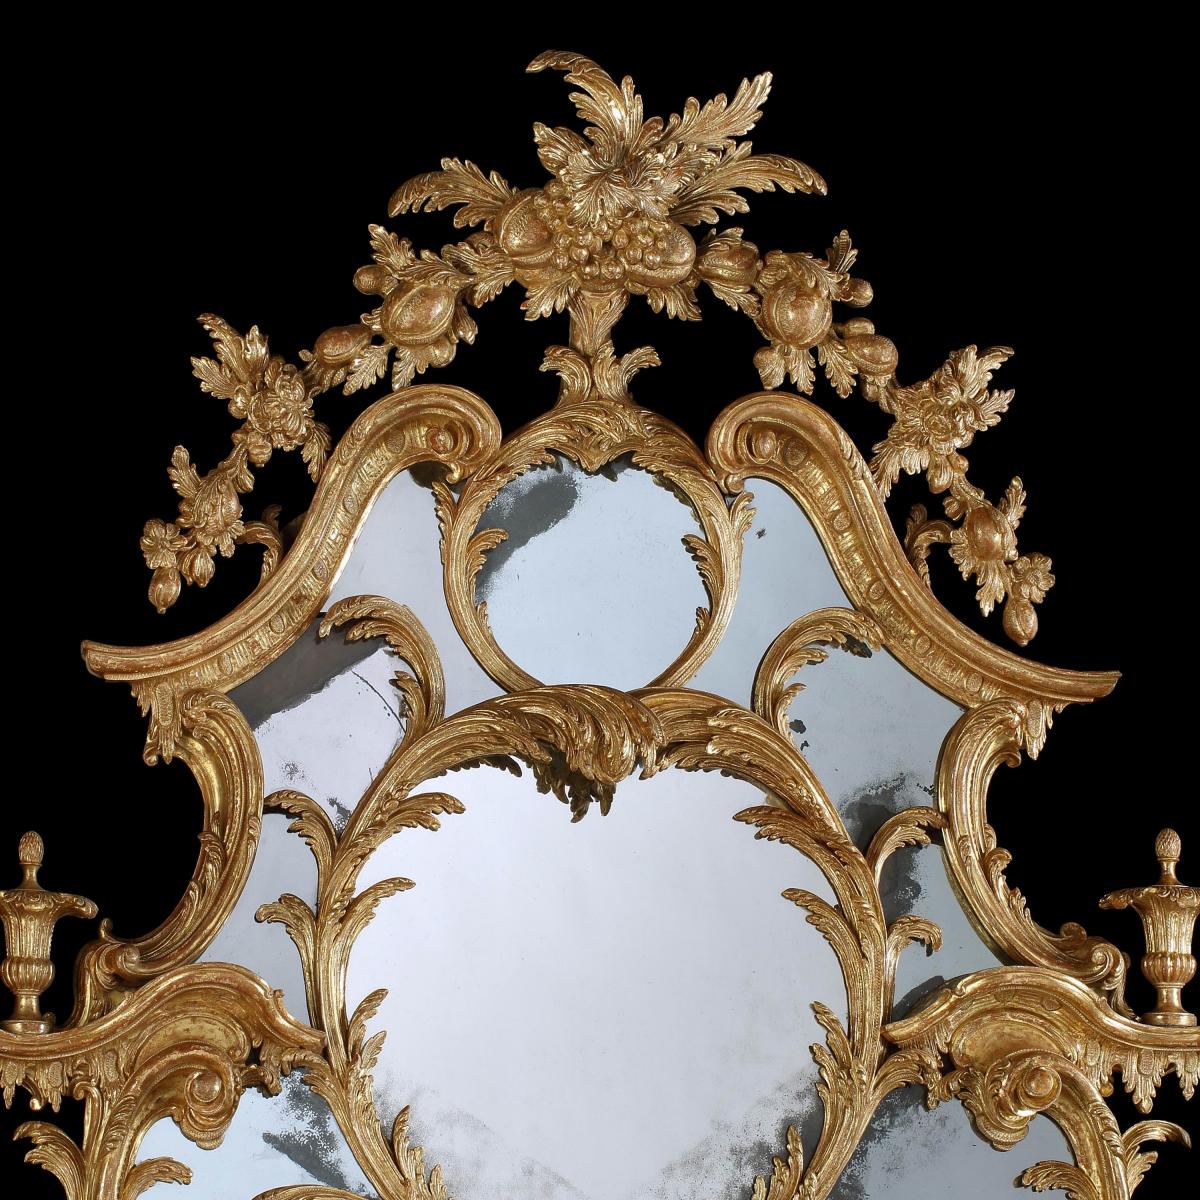 George III Mirrors Attributed to John Linnell